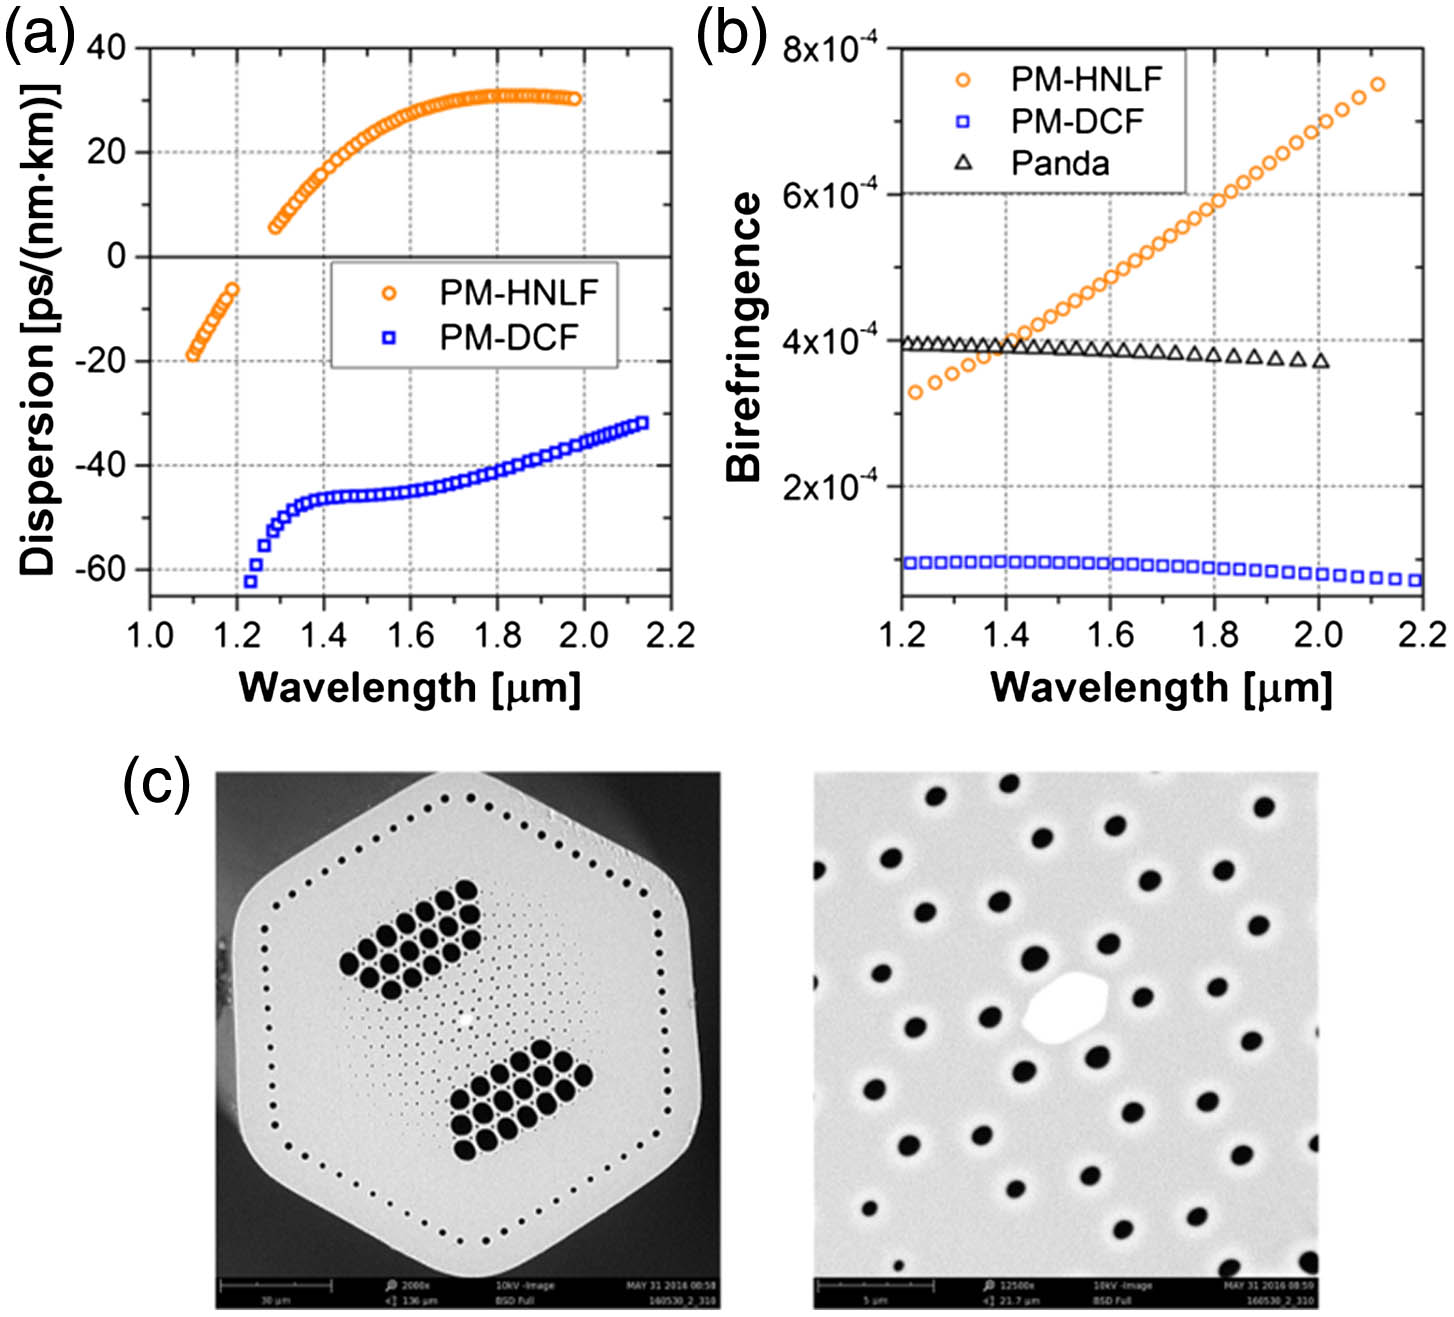 (a) Measured dispersion and (b) phase modal birefringence of the PM-HNLF (round points), PM-DCF (squared points) and standard panda fiber (triangle points); (c) SEM images of the PM-HNLF end facet.